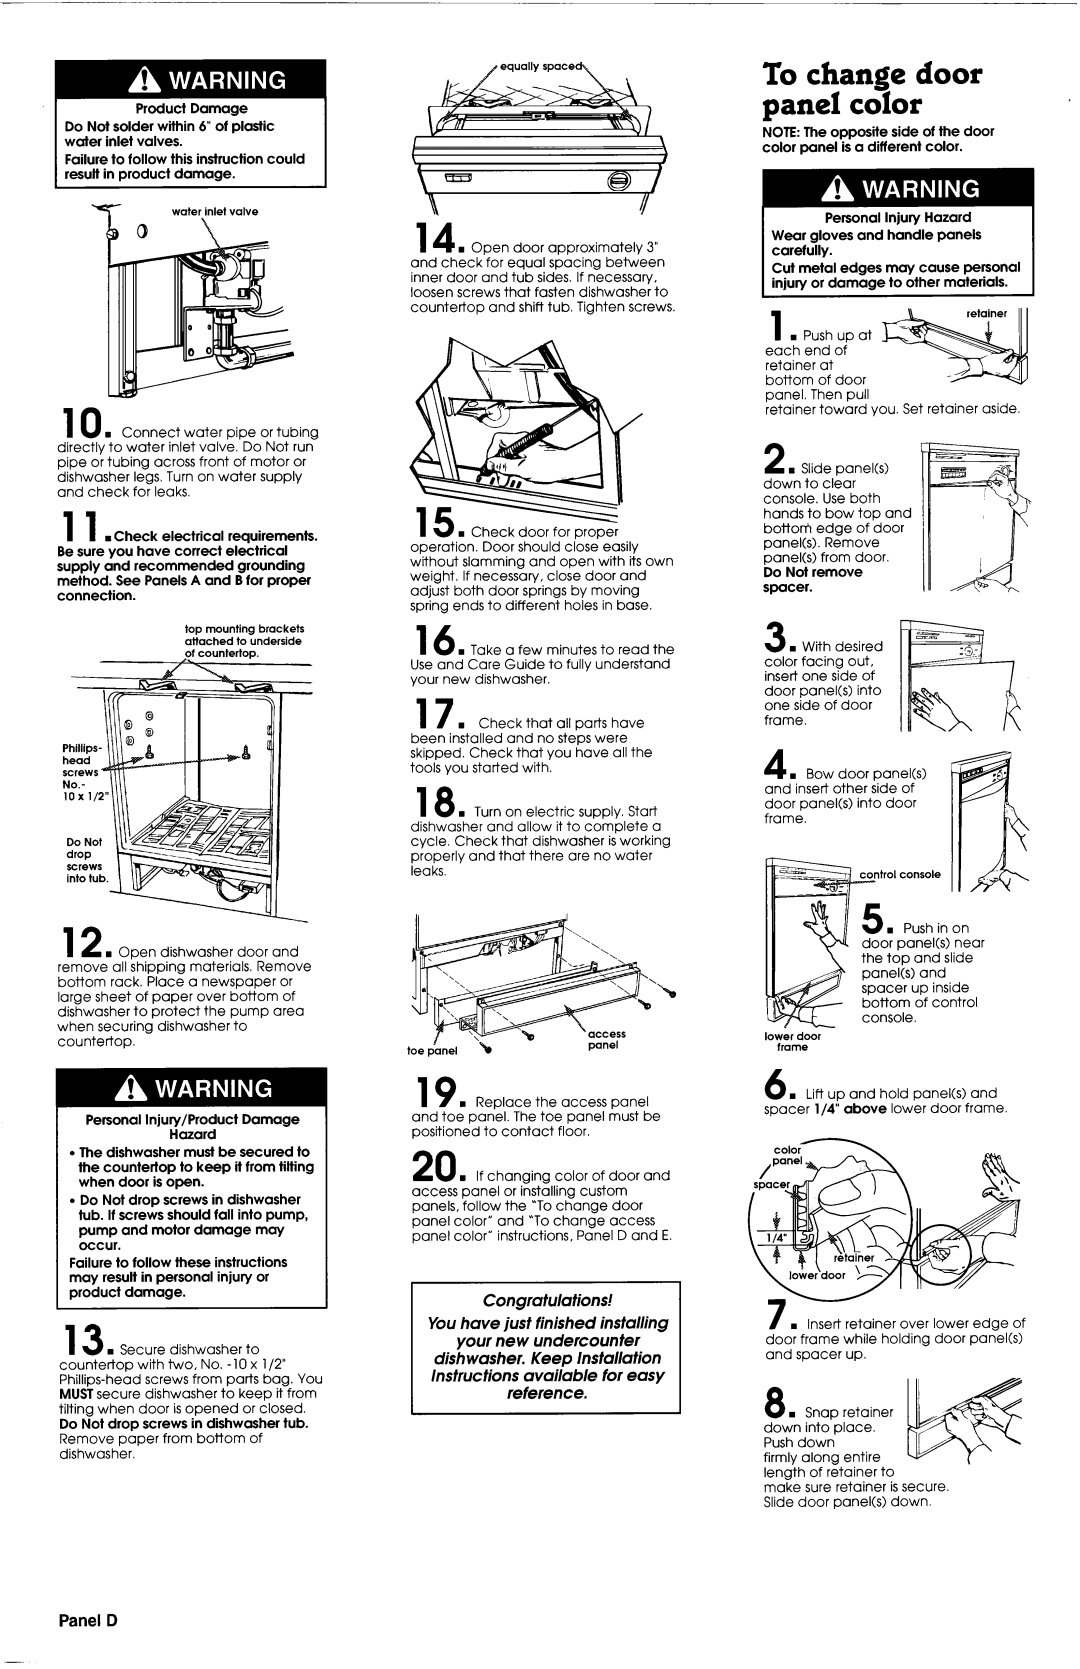 Whirlpool 3369092 REV. A installation instructions To change door panel color, Panel D 